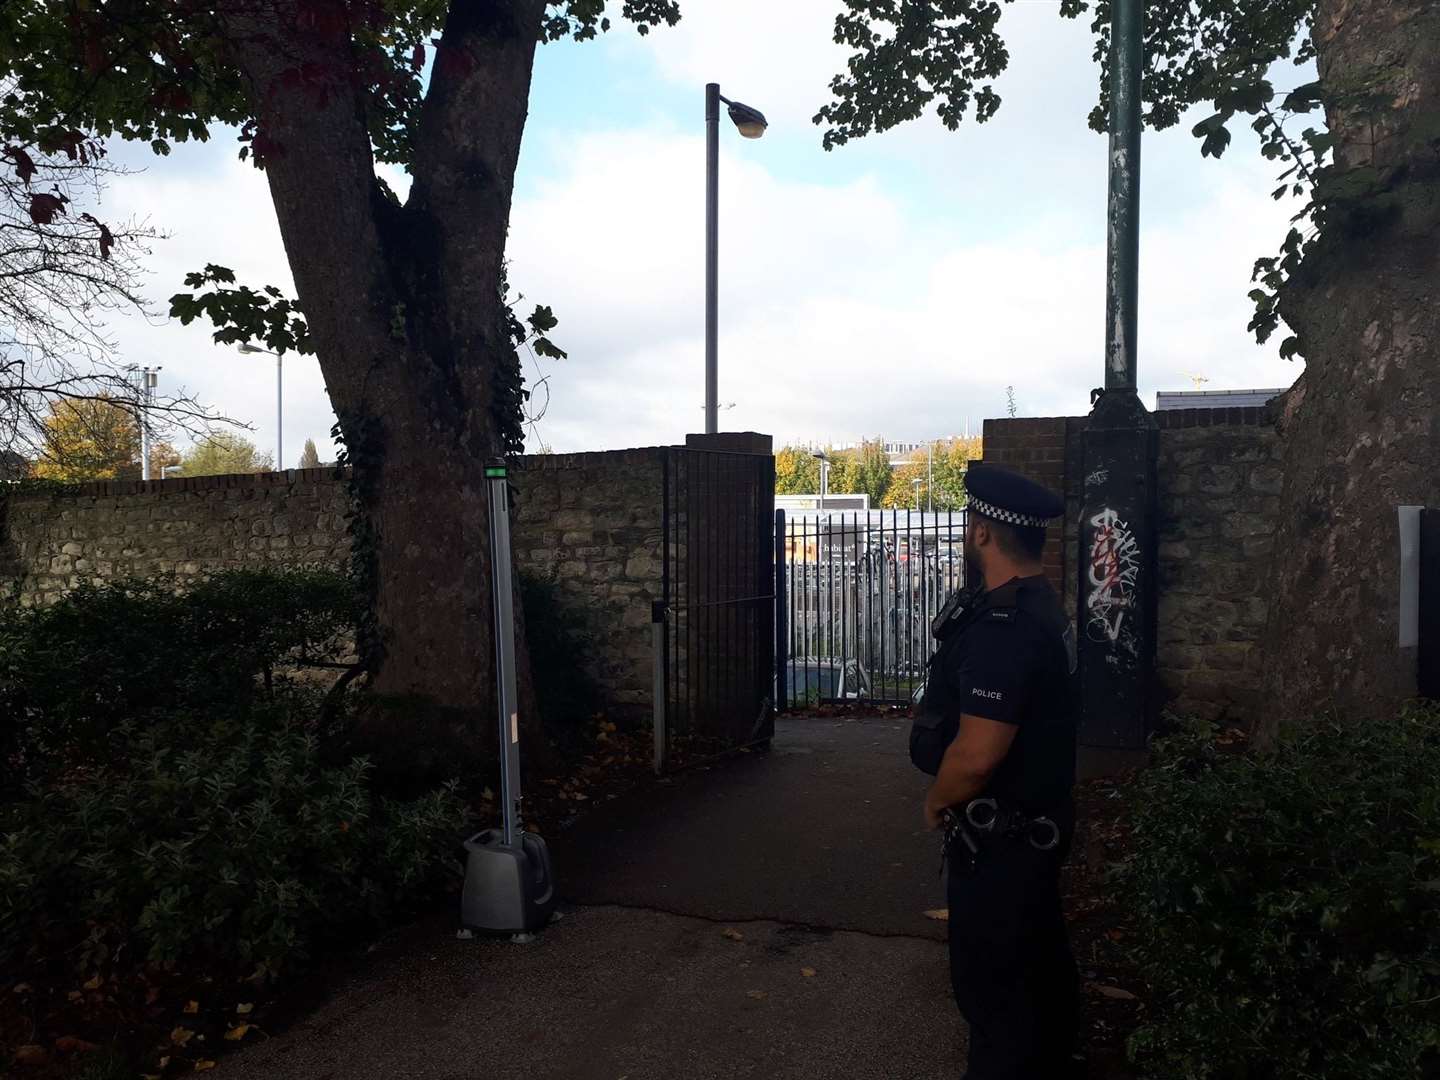 Police have been set up a knife bar in Brenchley Gardens, Maidstone (20938484)